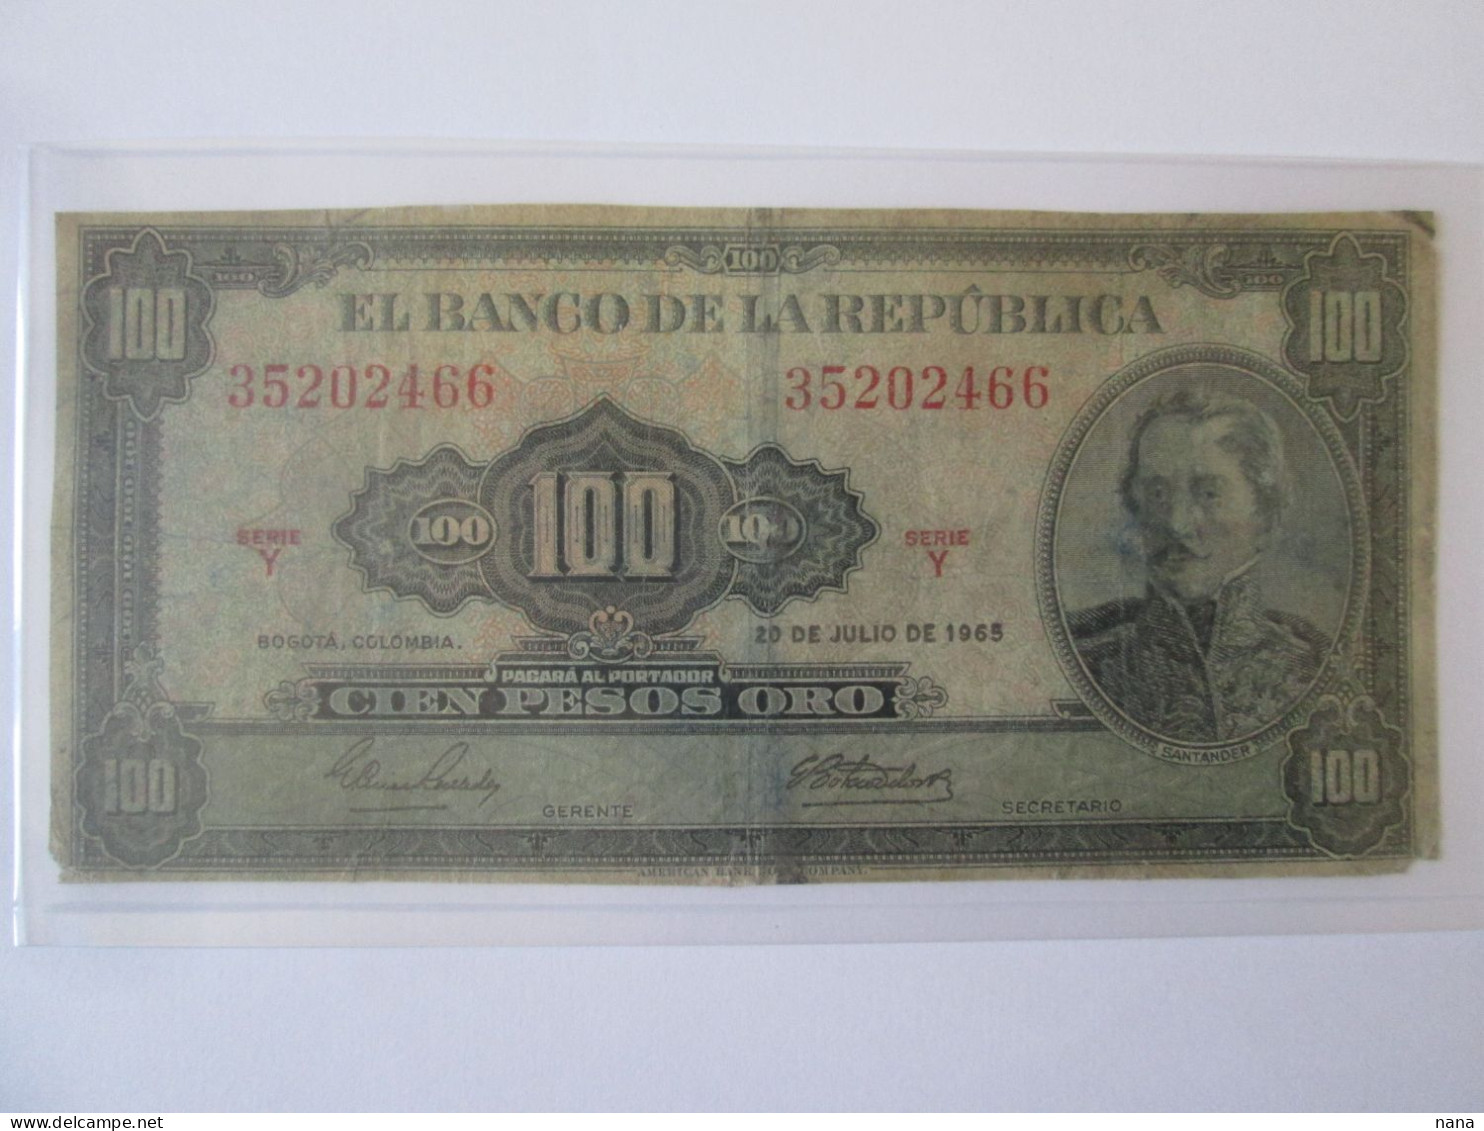 Rare! Colombia/Colombie 100 Pesos Oro 1965 Banknote Bad Grade,see Pictures - Colombia